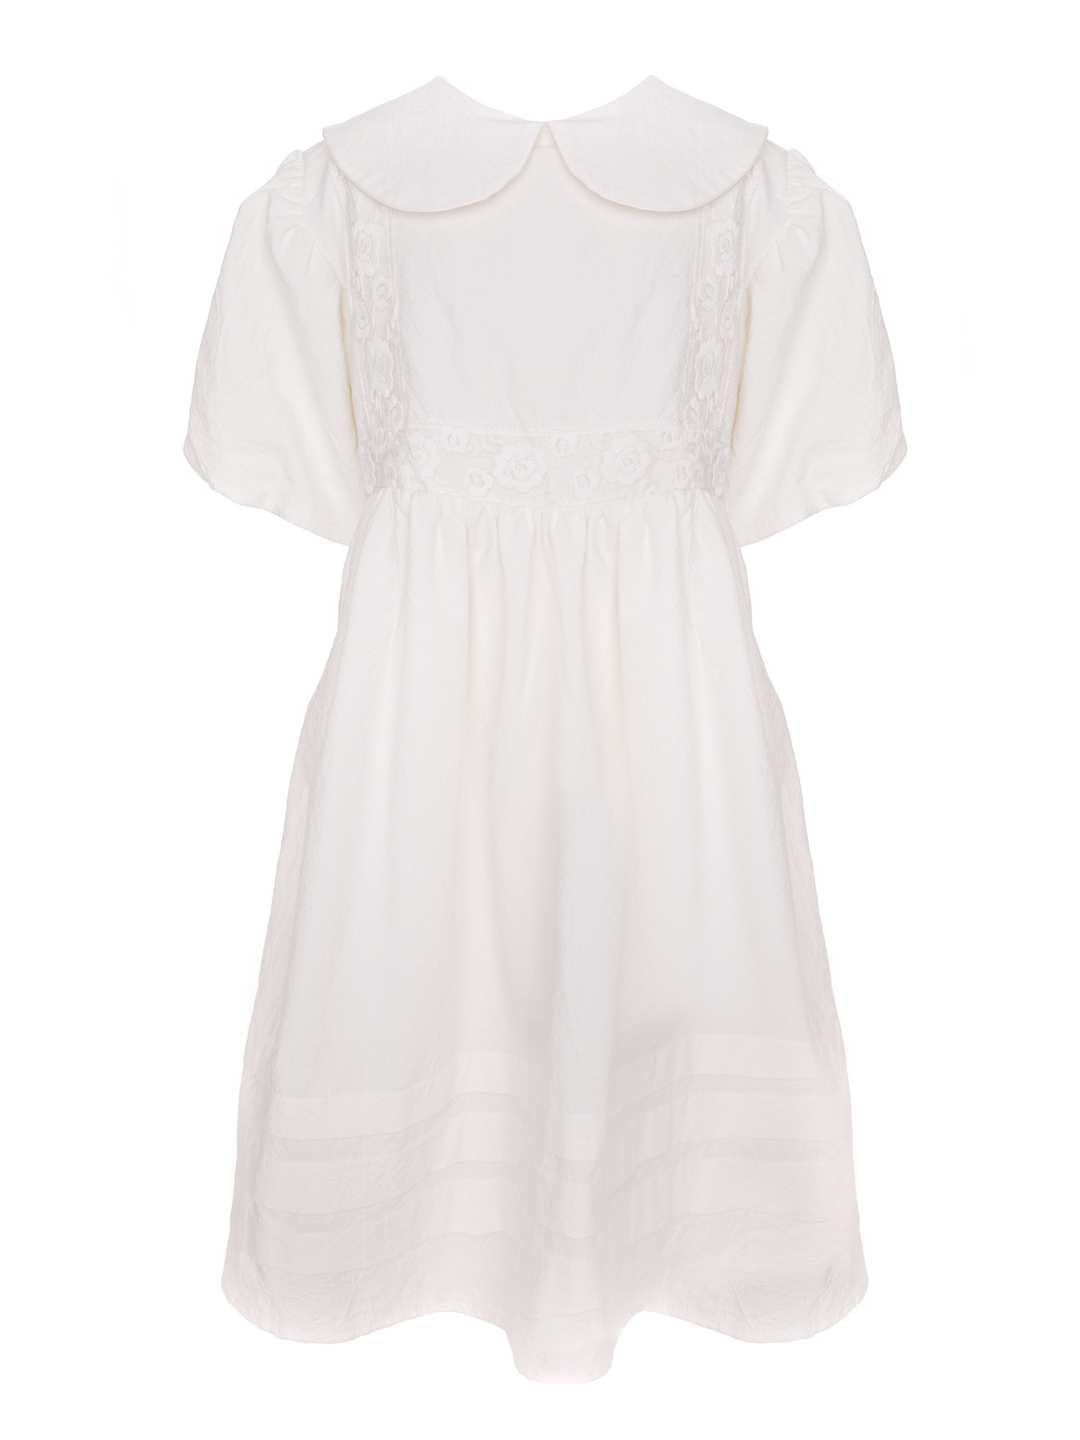 JACQUELINE DRESS-WHITE COTTON WITH LACE INSERTION